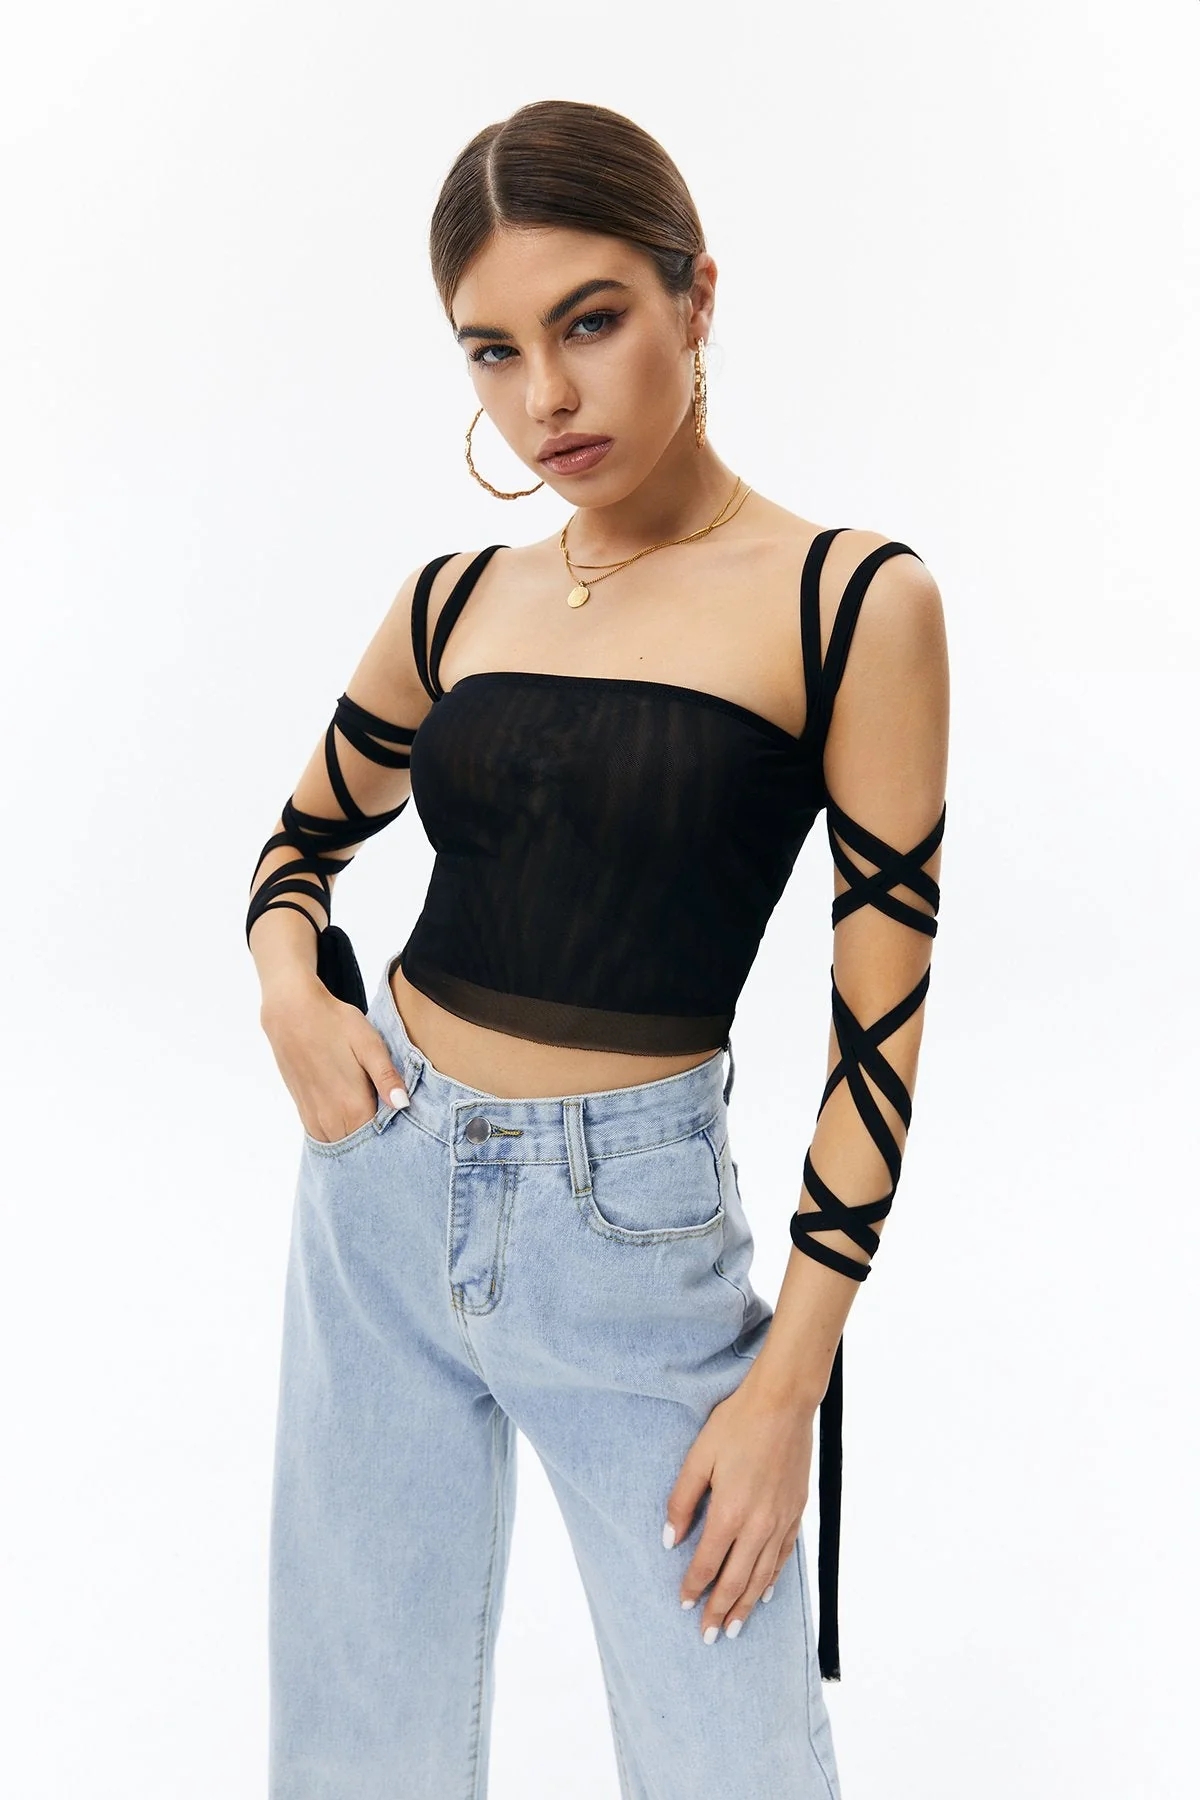 Solid Black Mesh Laced Arm Stretch Cami Crop Top